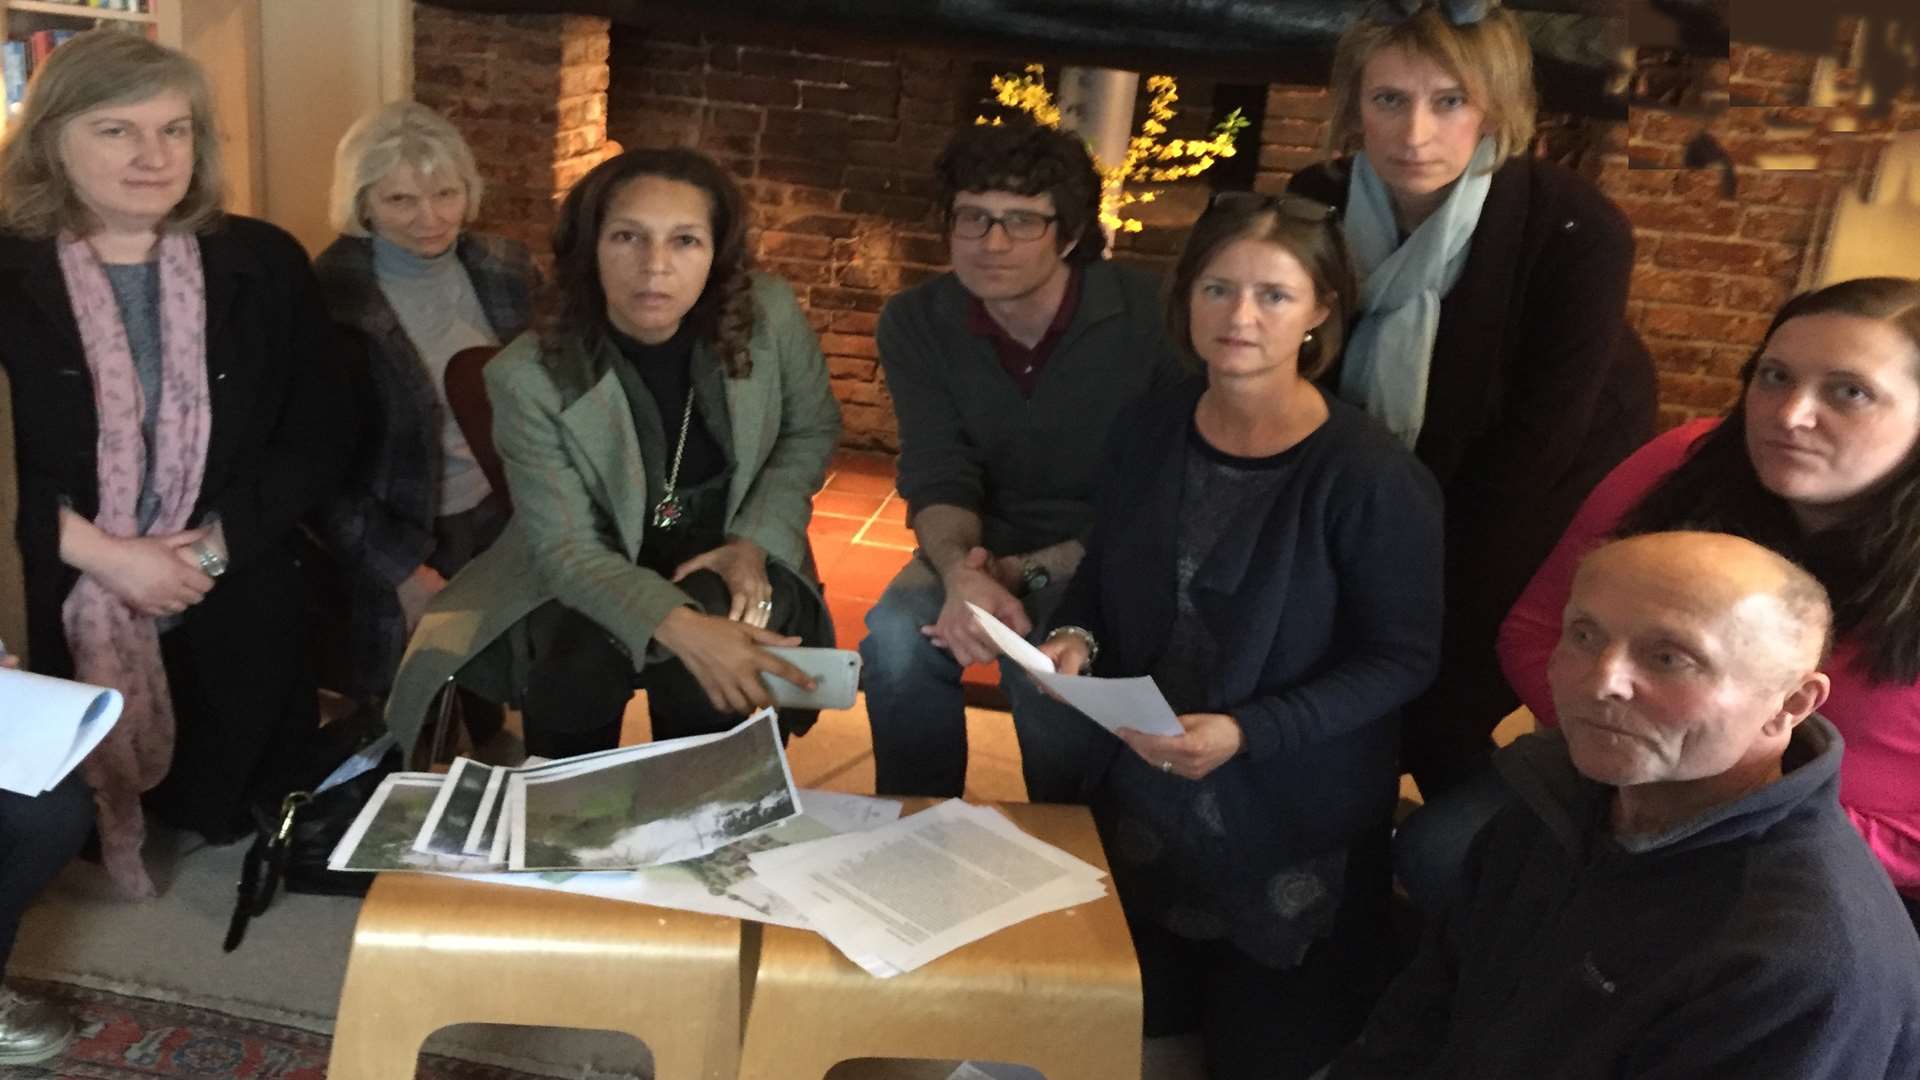 Members of The Yalding Residents for Sensible Development Group examine the planning application with Helen Grant MP. From left, Lisa Brooks, Jenny Scott, Helen Grant, John Ackerman, Bethan Godden, Meg West, Susie Welland and Stephen Day